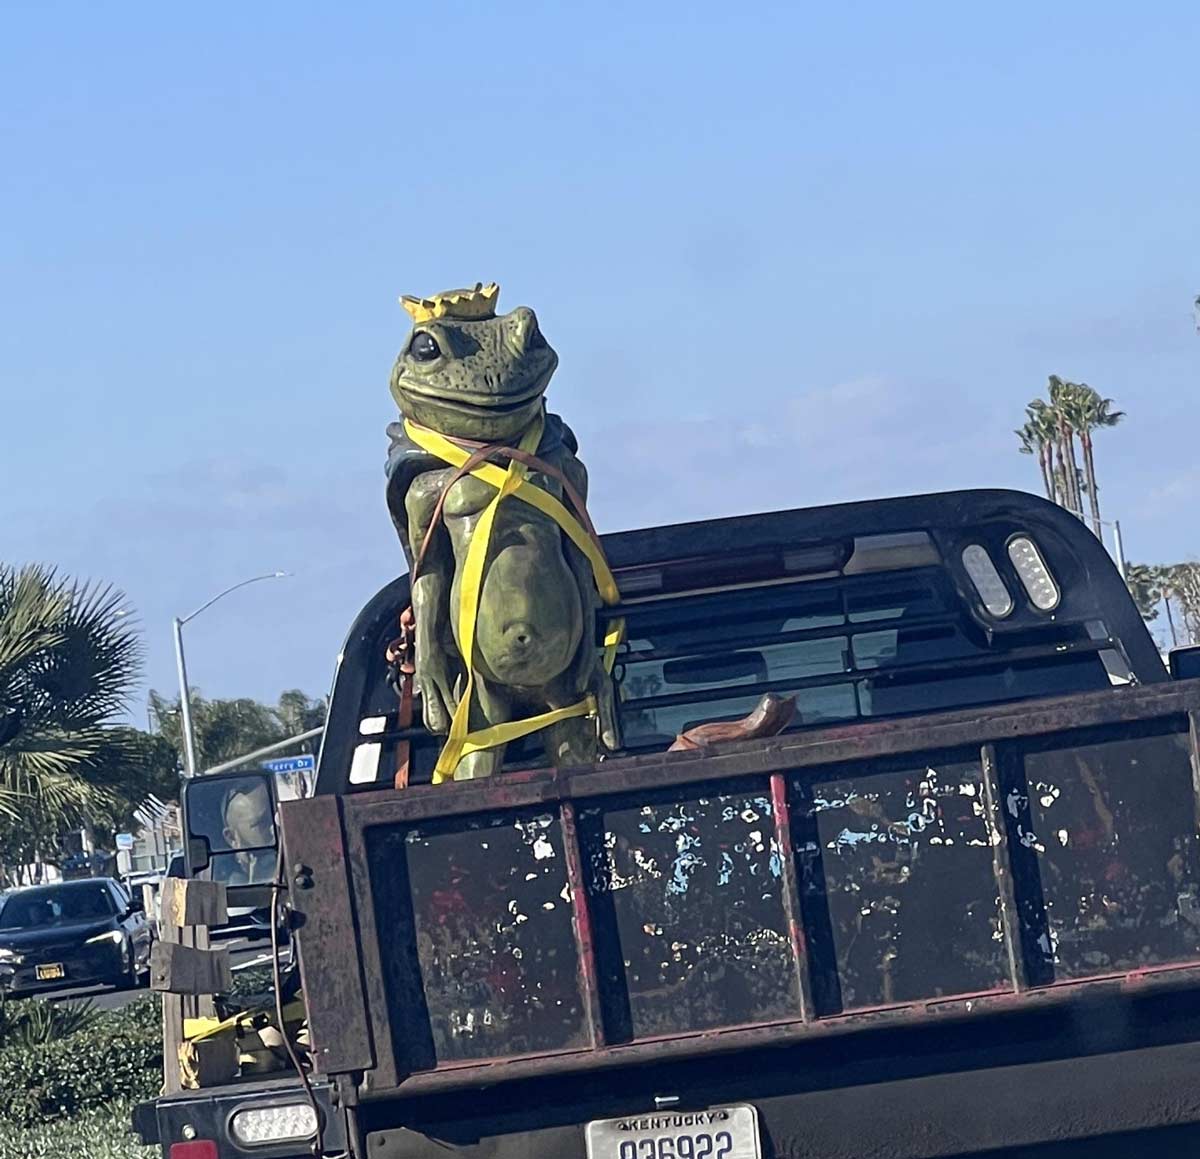 The frog king cut me off in traffic today